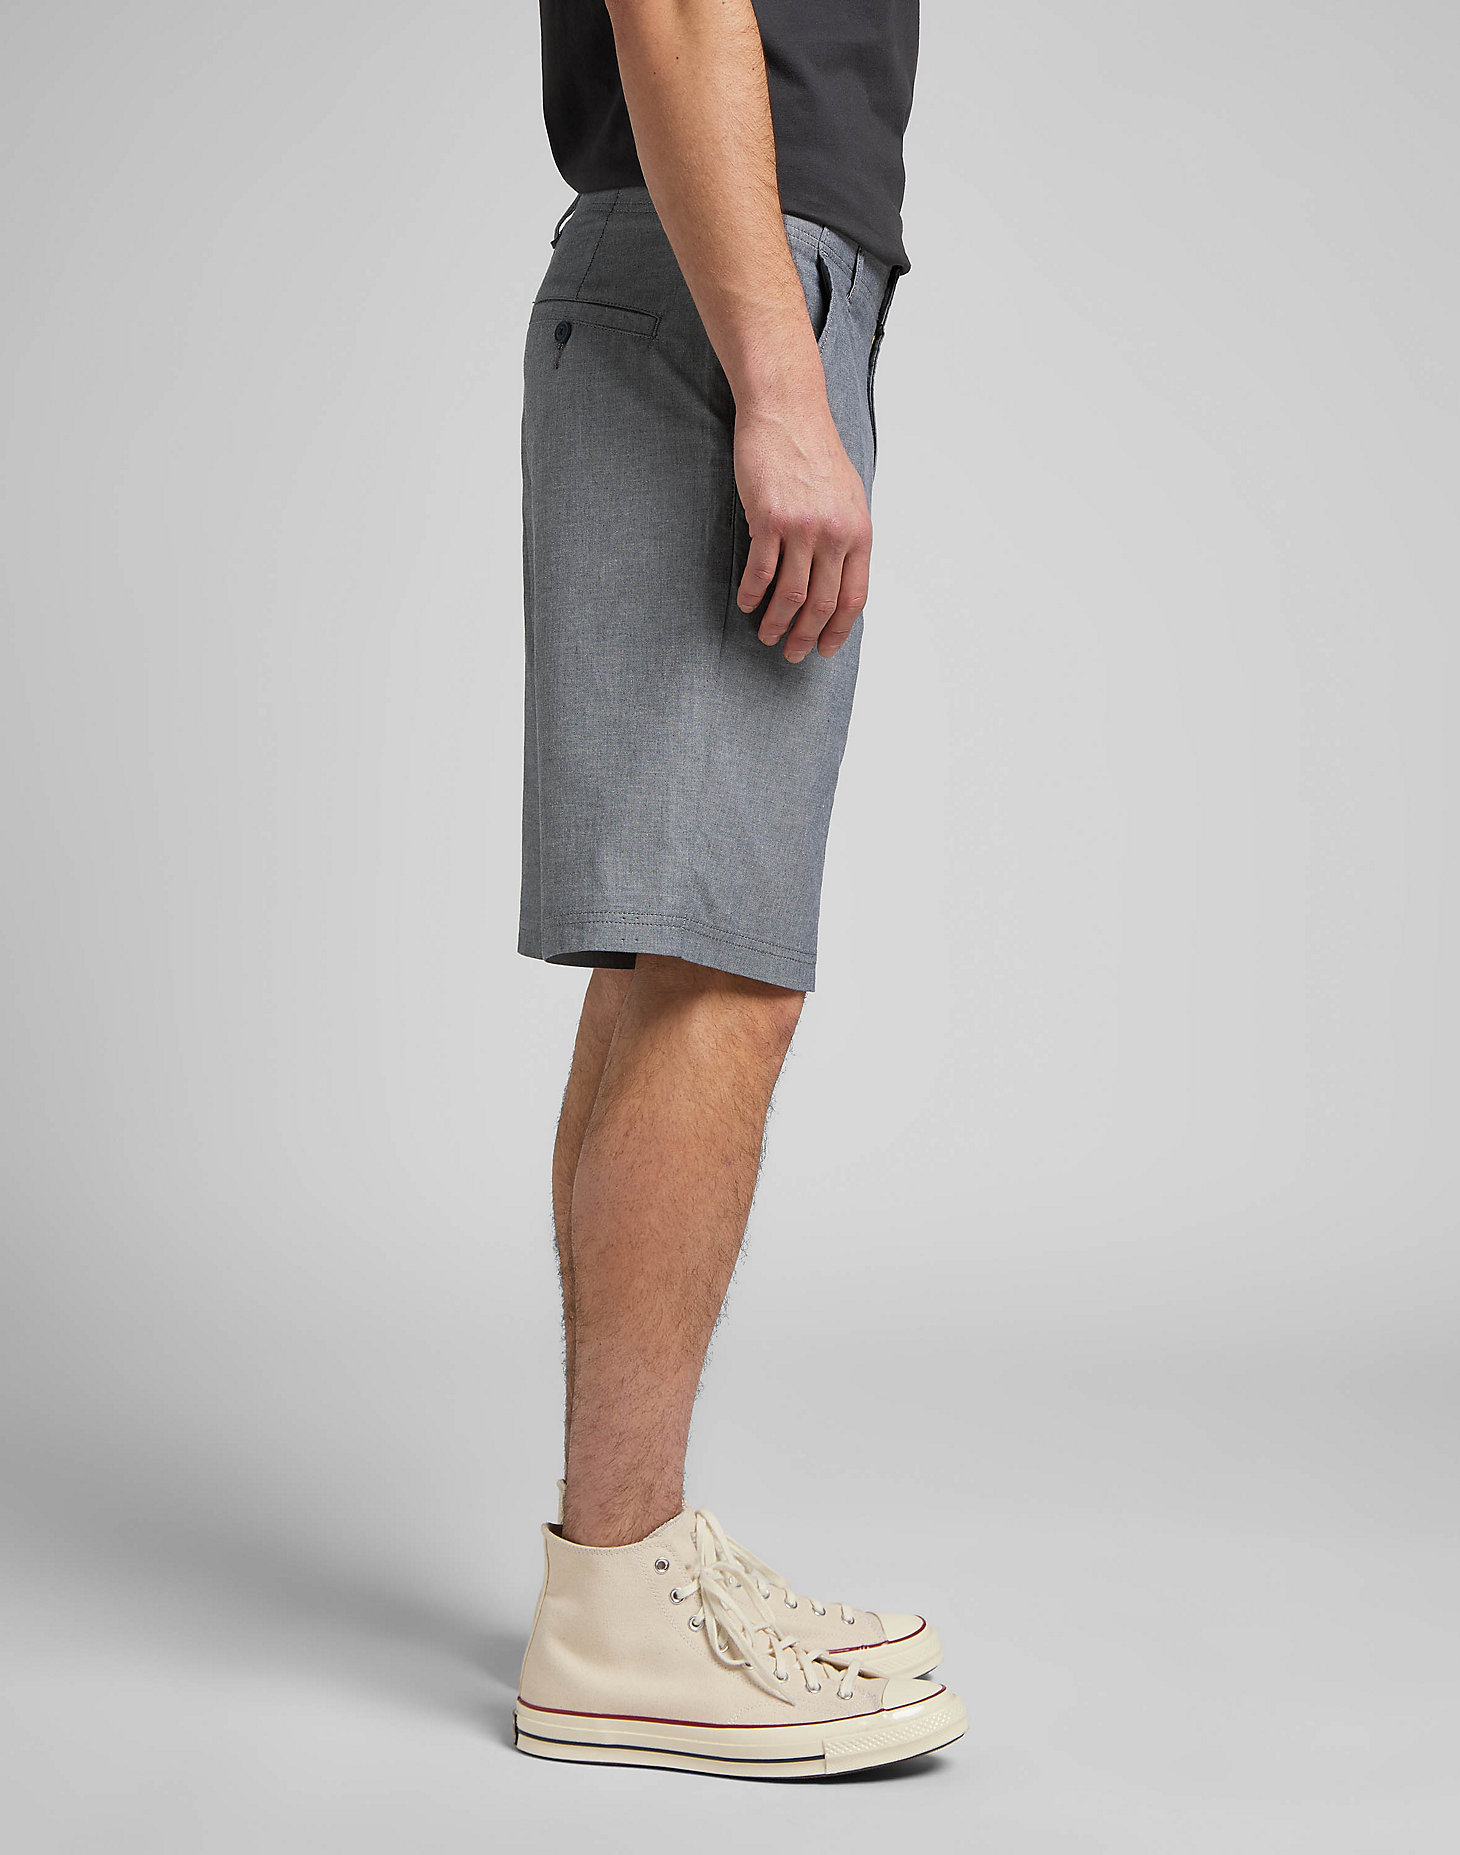 Extreme Comfort Chino Short in Chambray alternative view 3